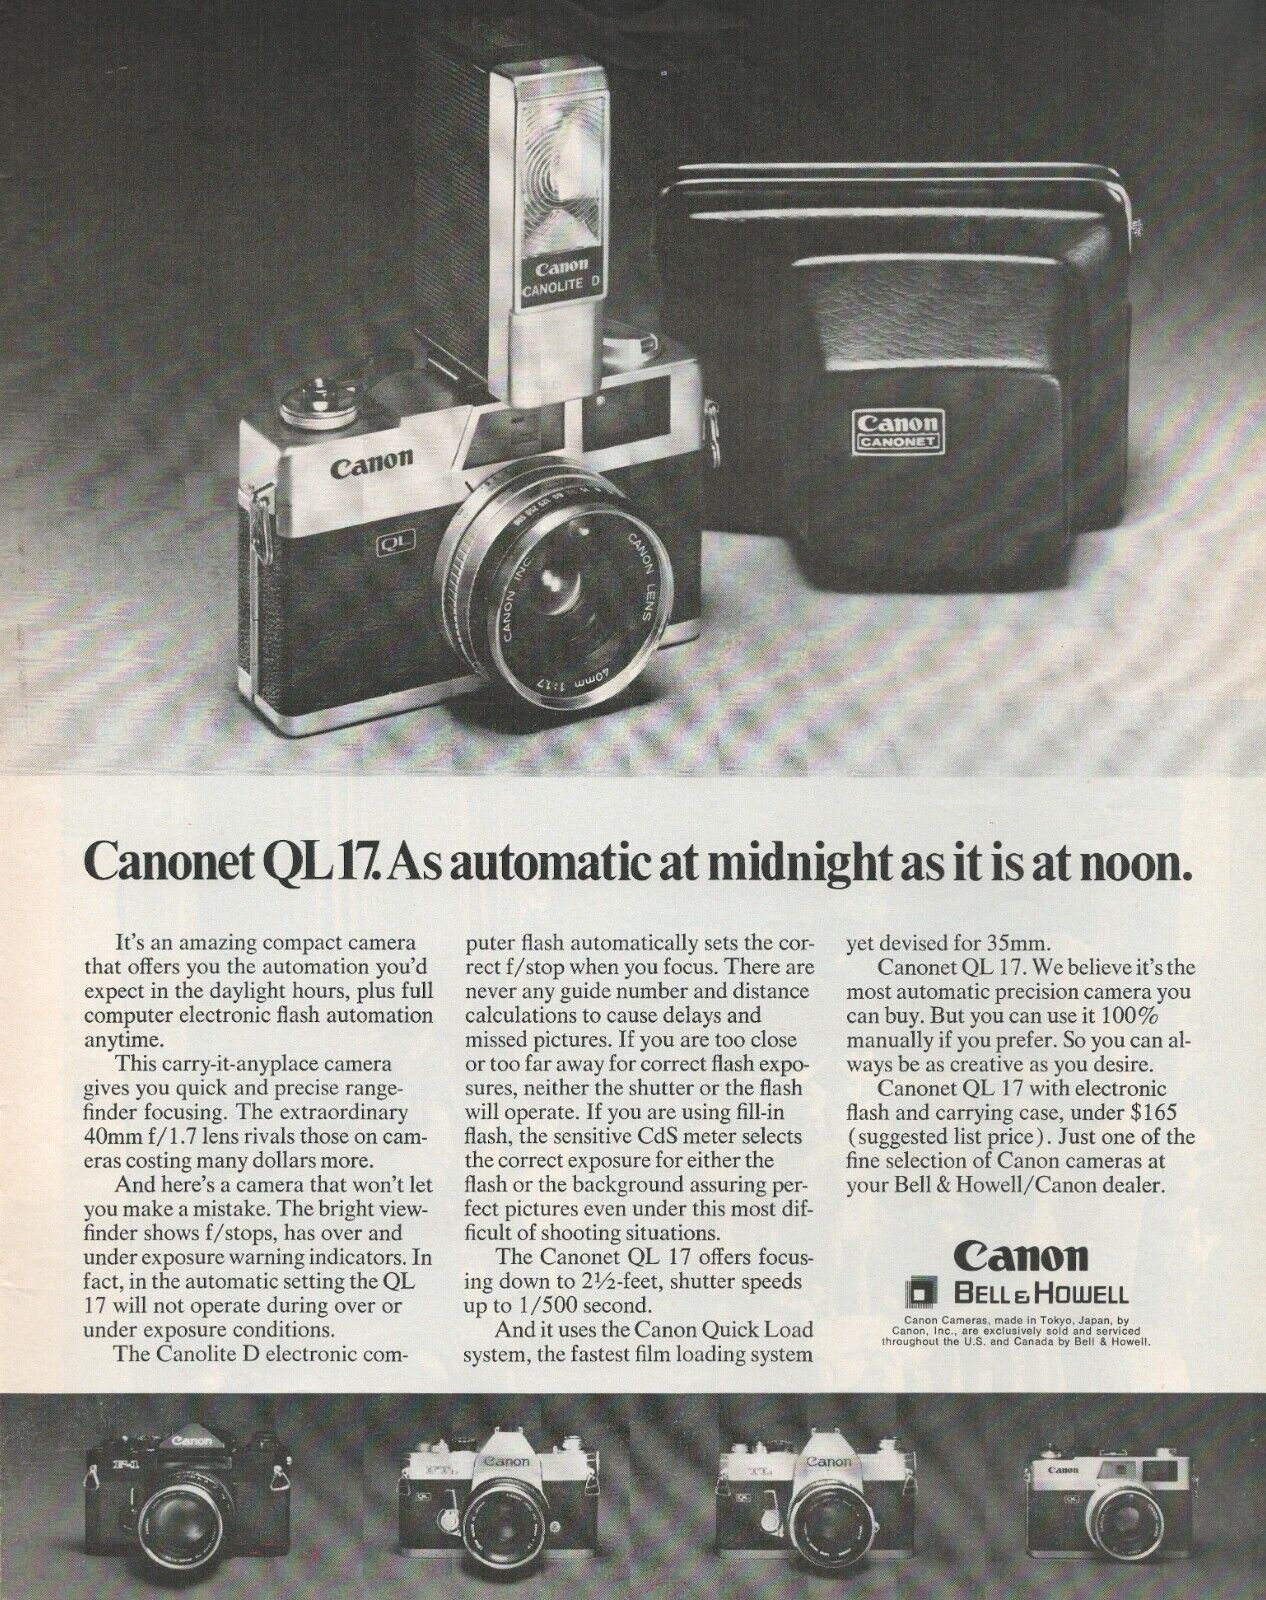 1971 Canon Bell & Howell Camera Canonet QL17 Automatic Midnight as Noon Print Ad